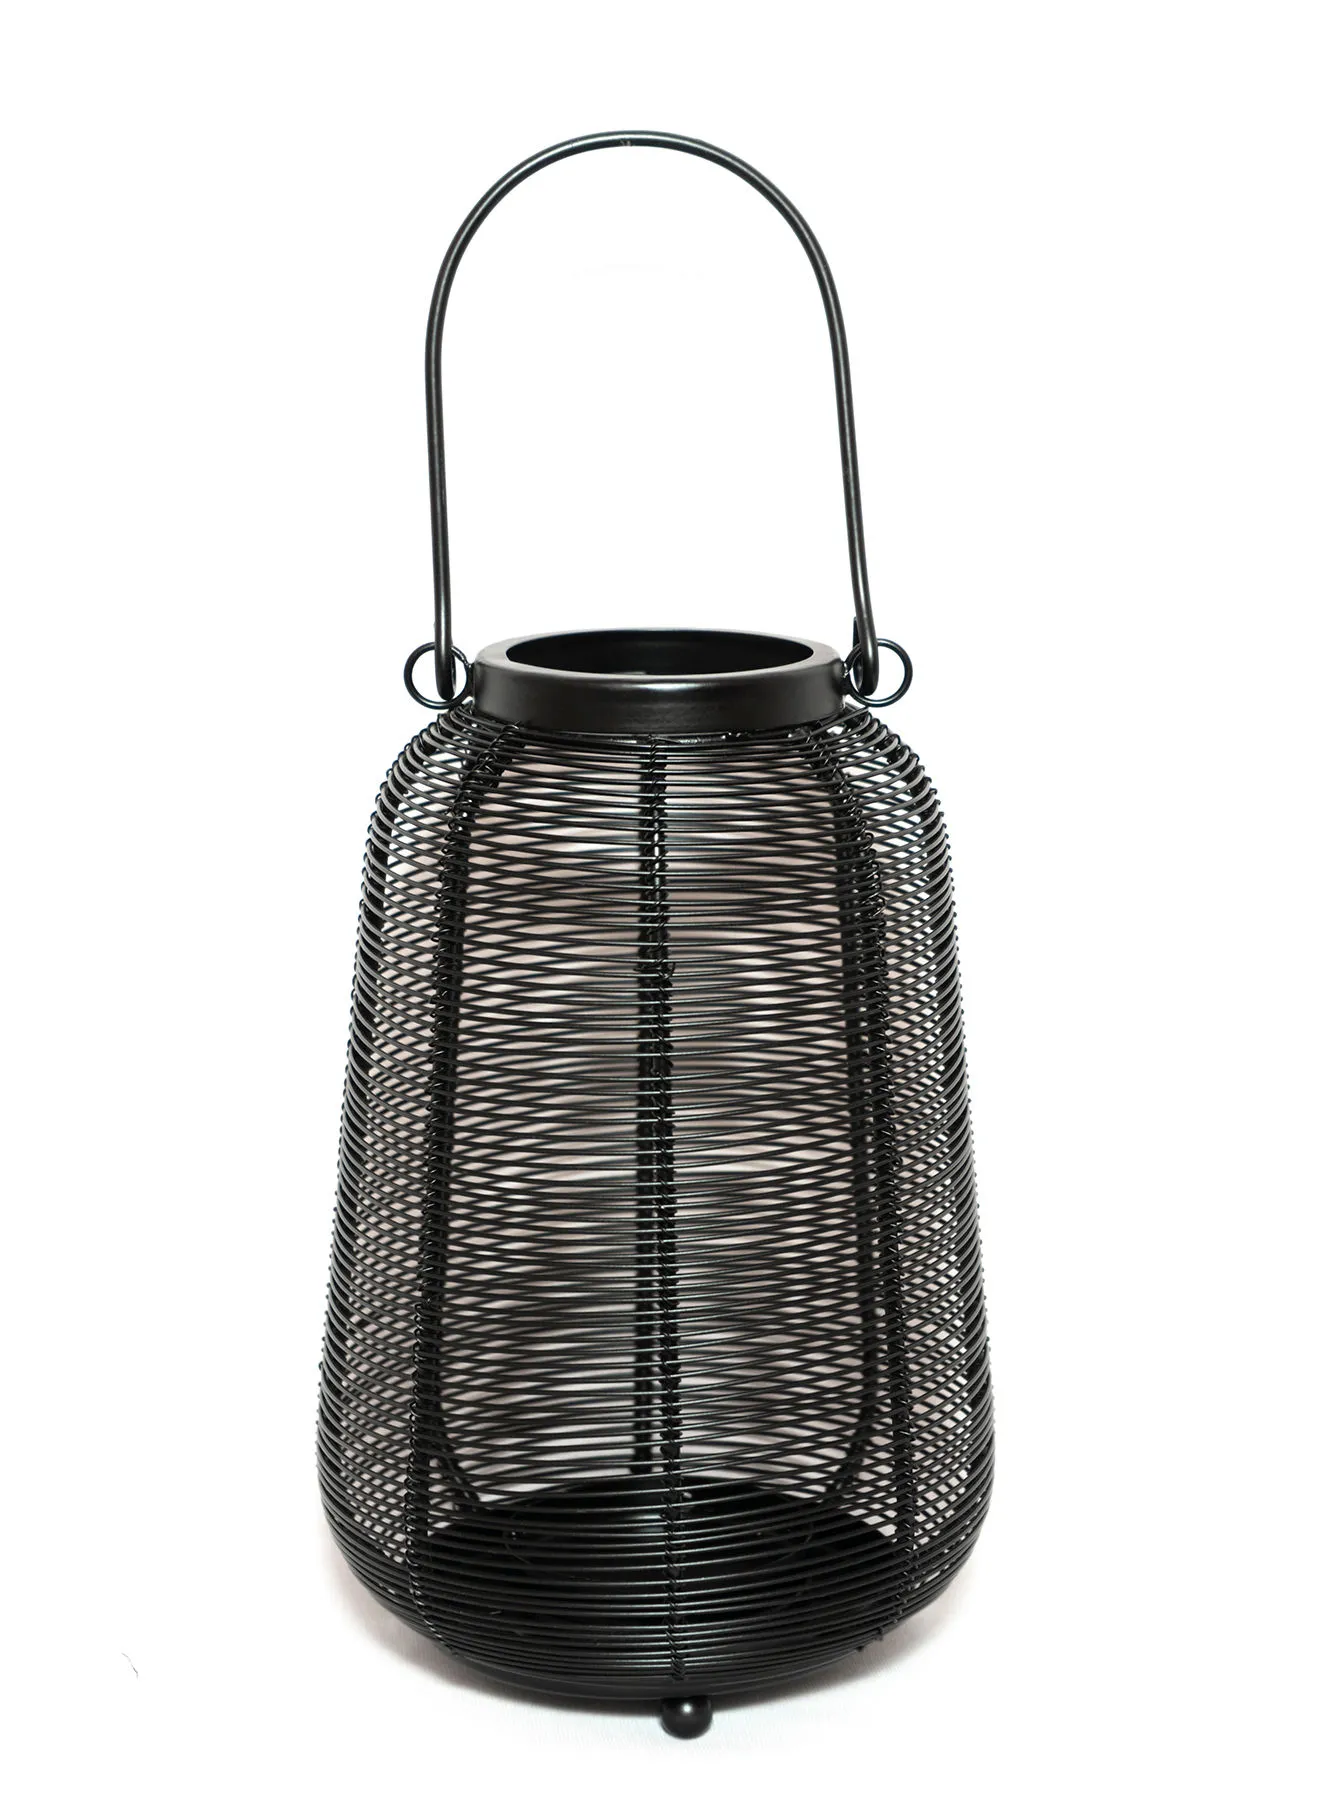 ebb & flow Modern Handmade Candle Holder Lantern Unique Luxury Quality Scents For The Perfect Stylish Home Black 16 x 16 x 25.4centimeter